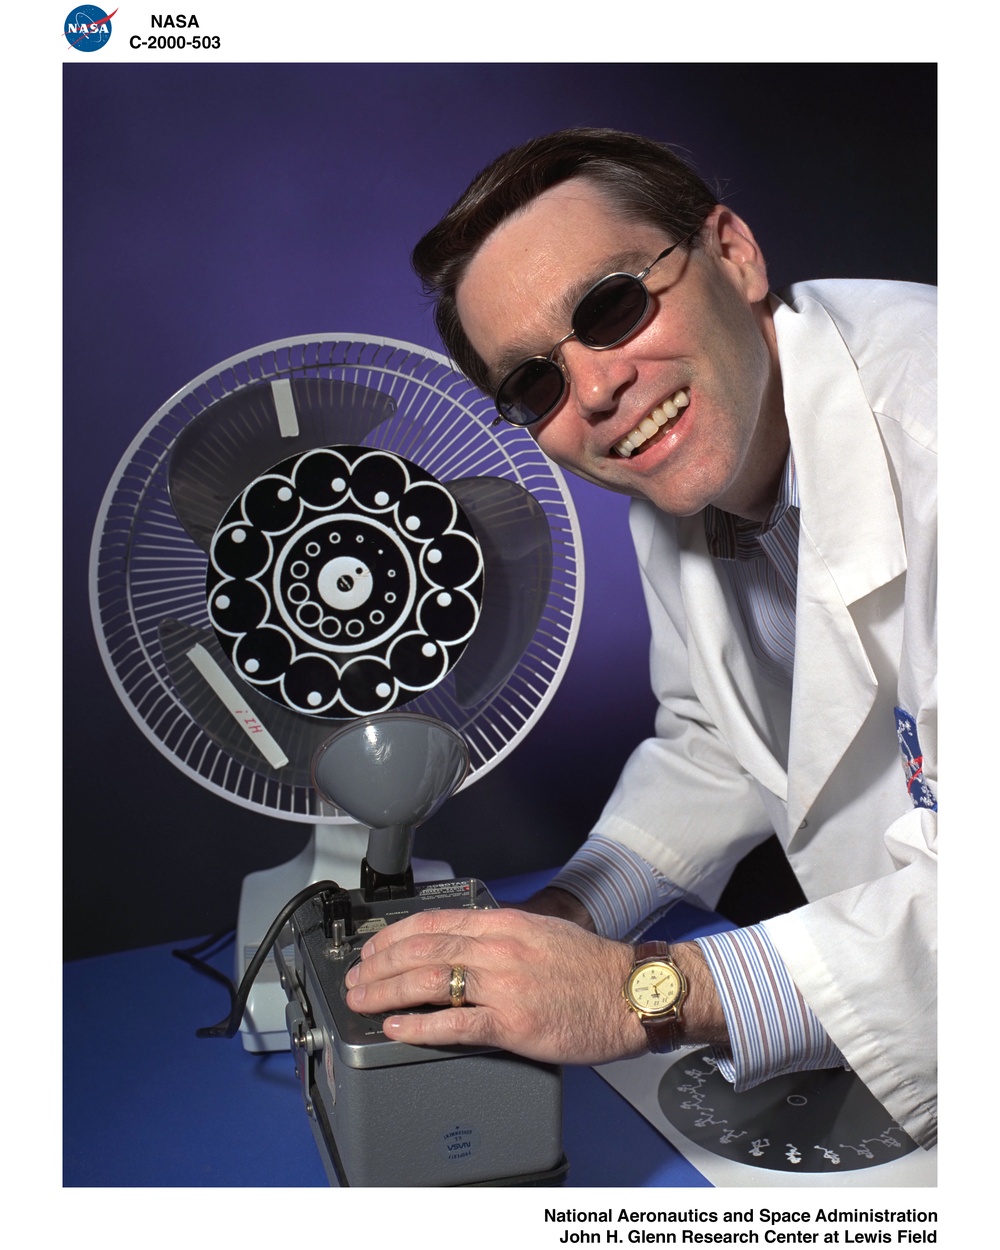 DOCTOR STROBO ALSO KNOWN AS HOWARD BROUGHTON OF THE IMAGING TECHNOLOGY CENTER AT NASA GLENN RESEARCH CENTER WITH STROBE DEVICE USED IN PRESENTATION FOR BRING YOUR CHILDREN TO WORK DAY